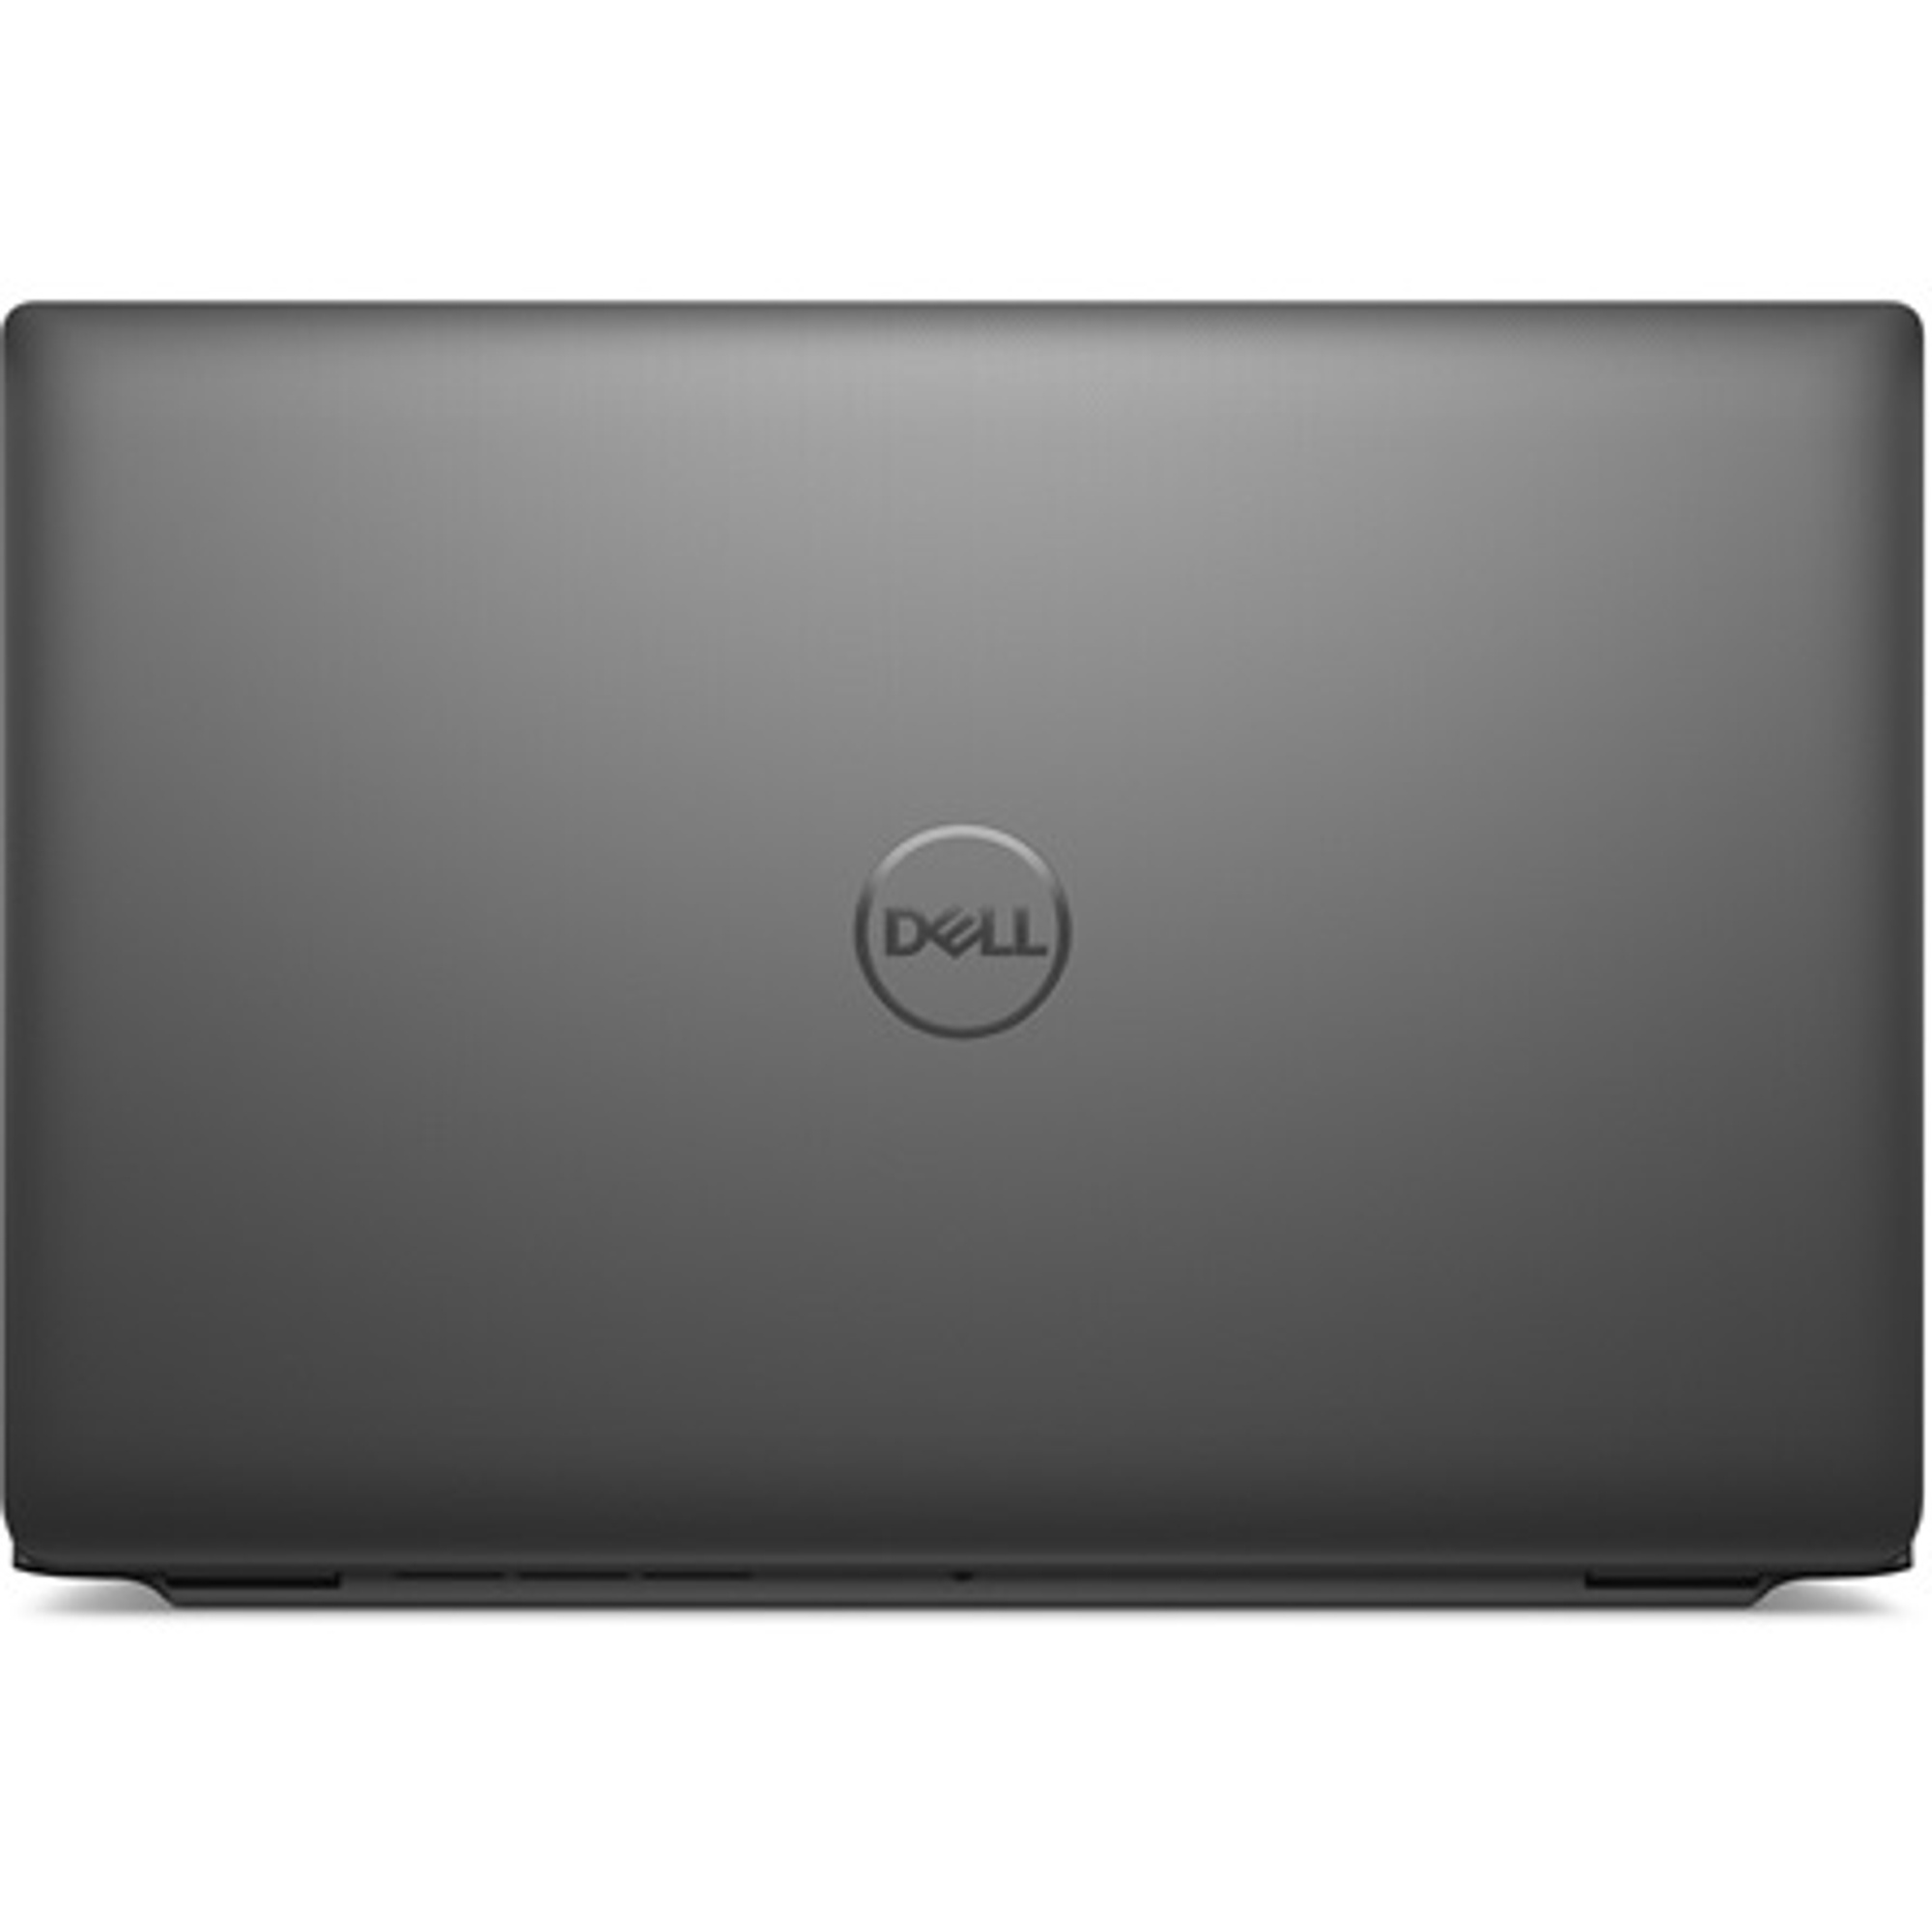 DELL L3540-15 Laptop / Notebook 7